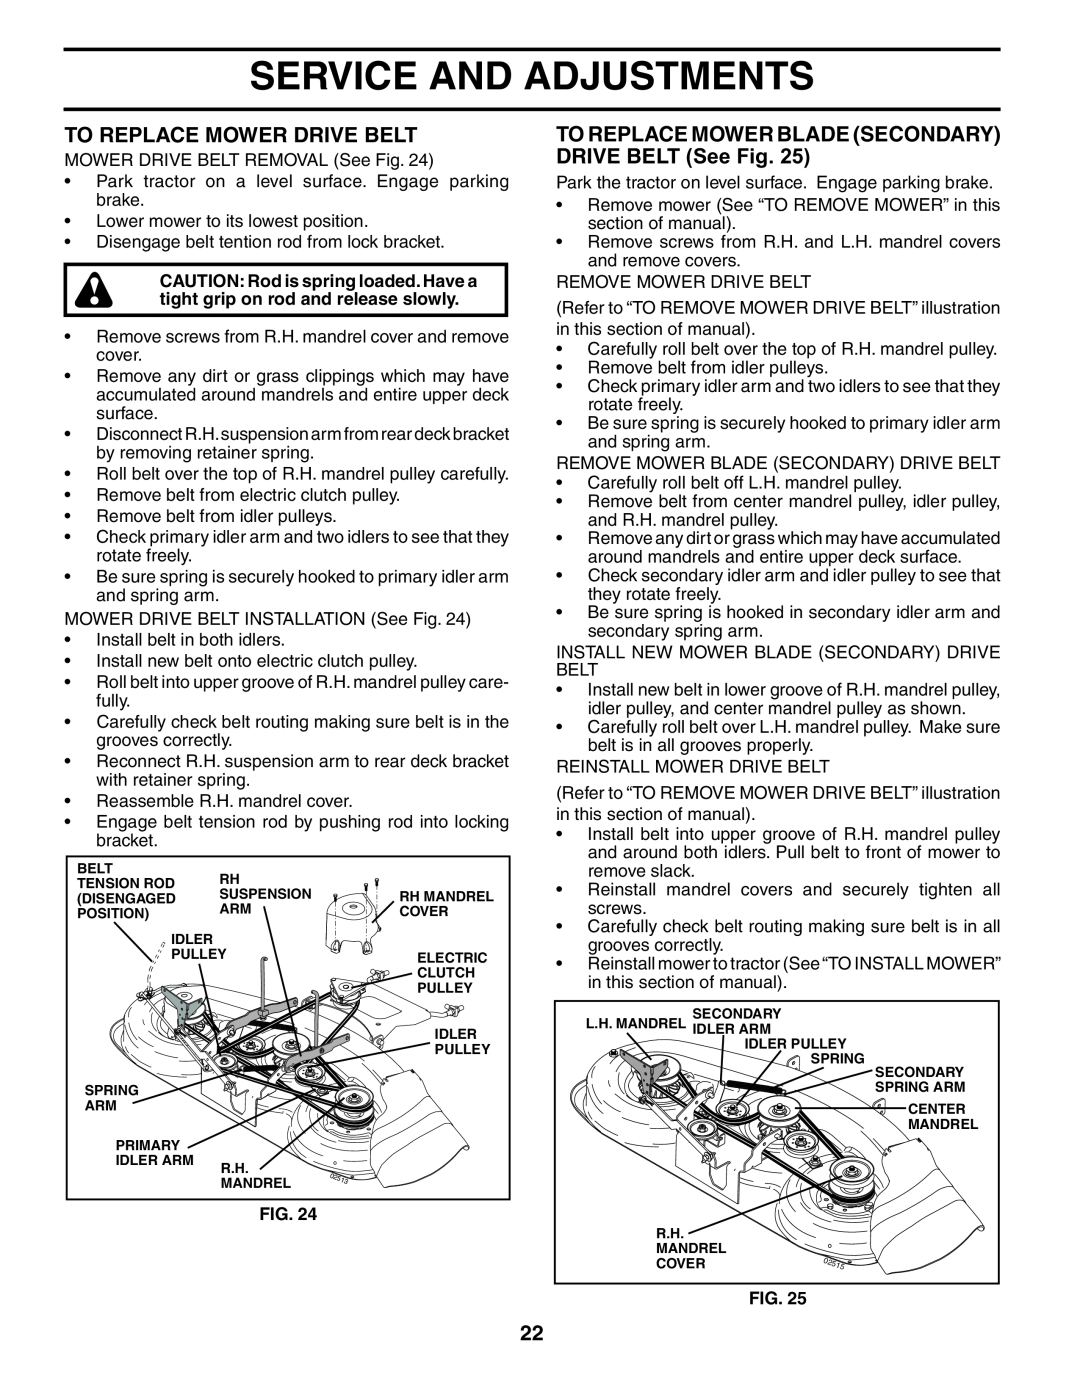 Poulan PD25PH48STB owner manual To Replace Mower Drive Belt, To Replace Mower Blade Secondary, Service And Adjustments 